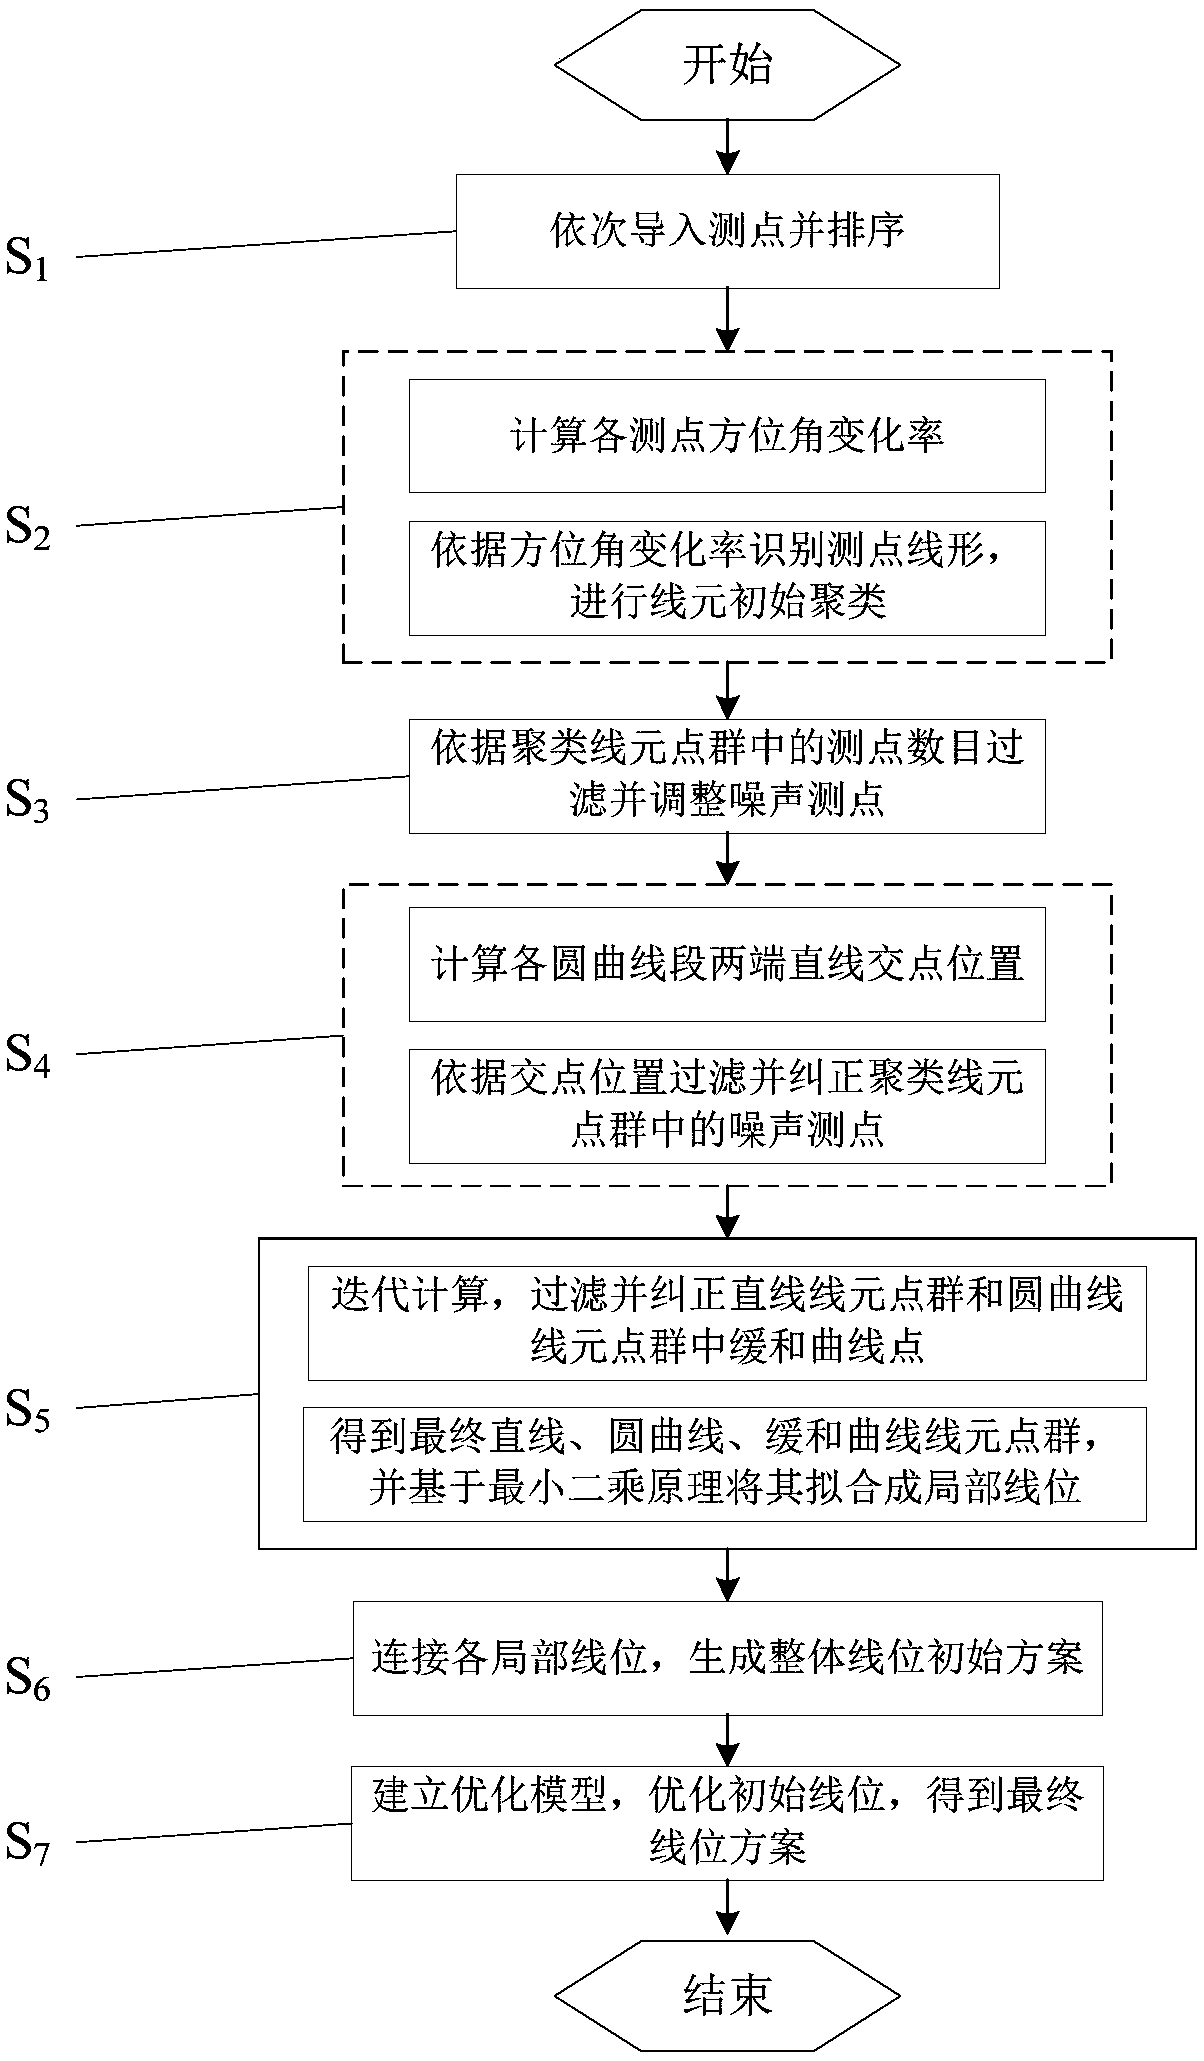 Overall reconstruction design method of plane line position of existing railway